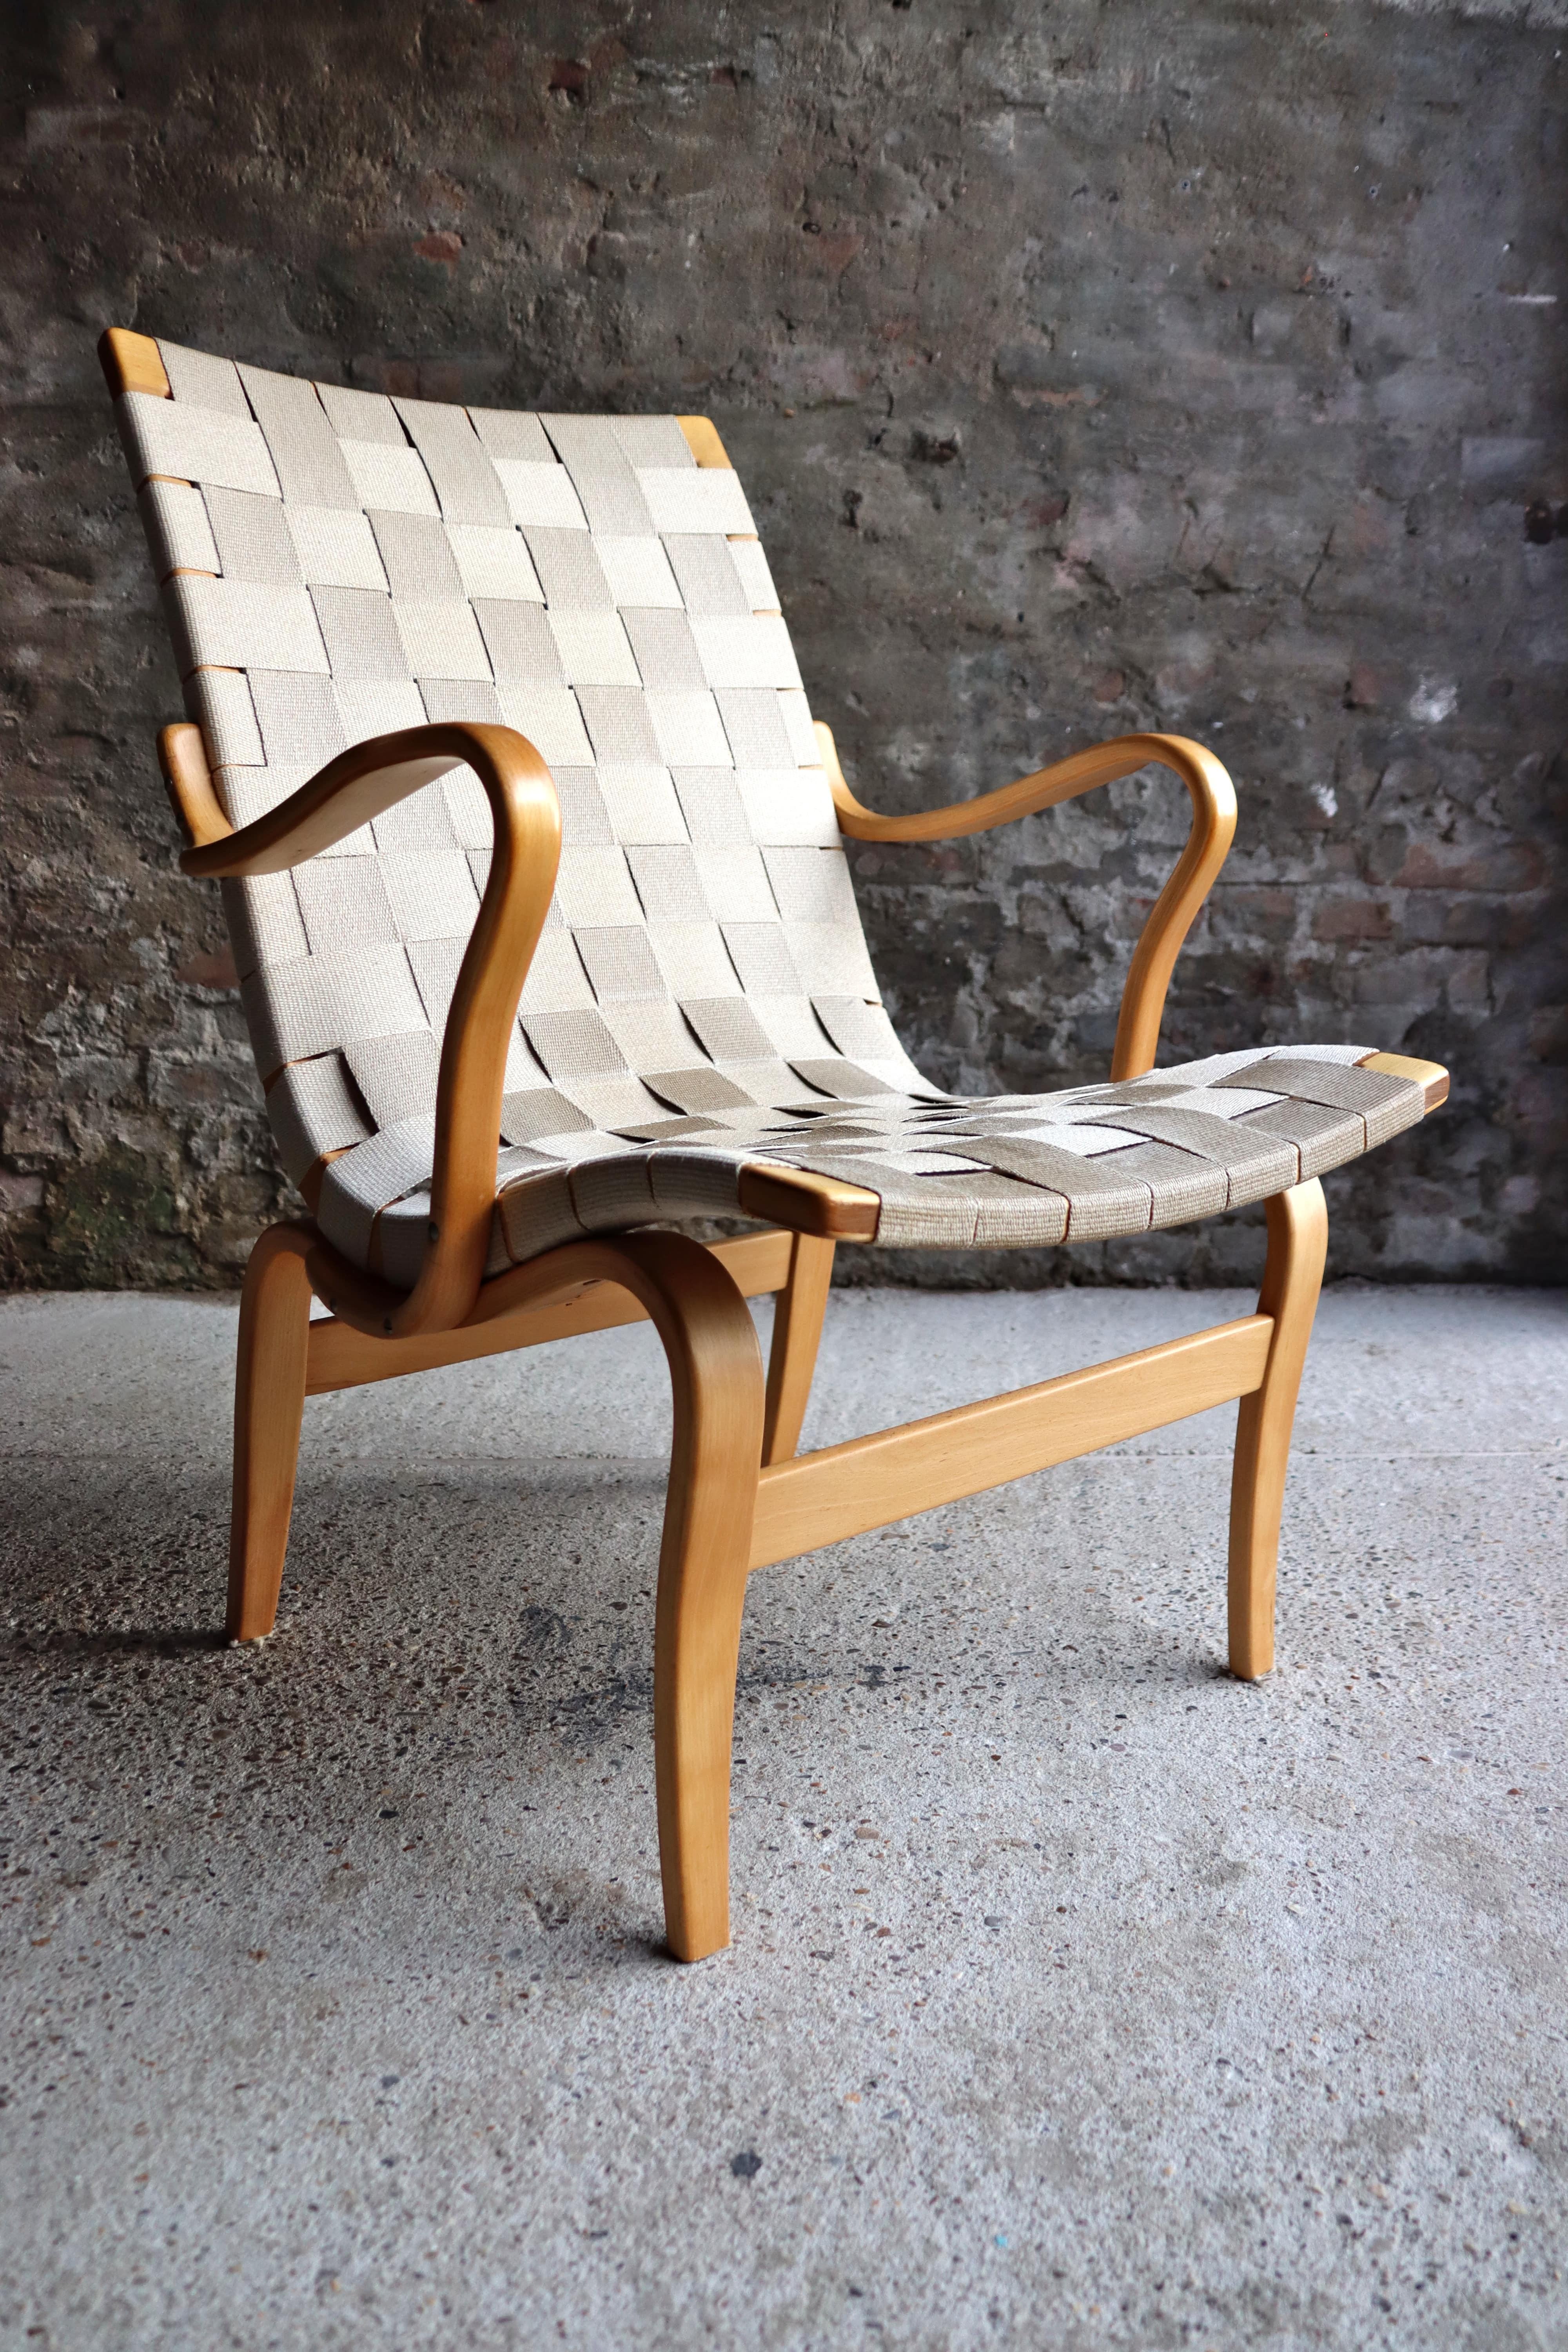 This is the Eva Chair and is designed by Bruno Mathsson for Karl Mathsson in Sweden 1960s. This one features a solid birch frame and has the original woven seat and back. Few signs of wear, overall in a very good and original condition. Signed at